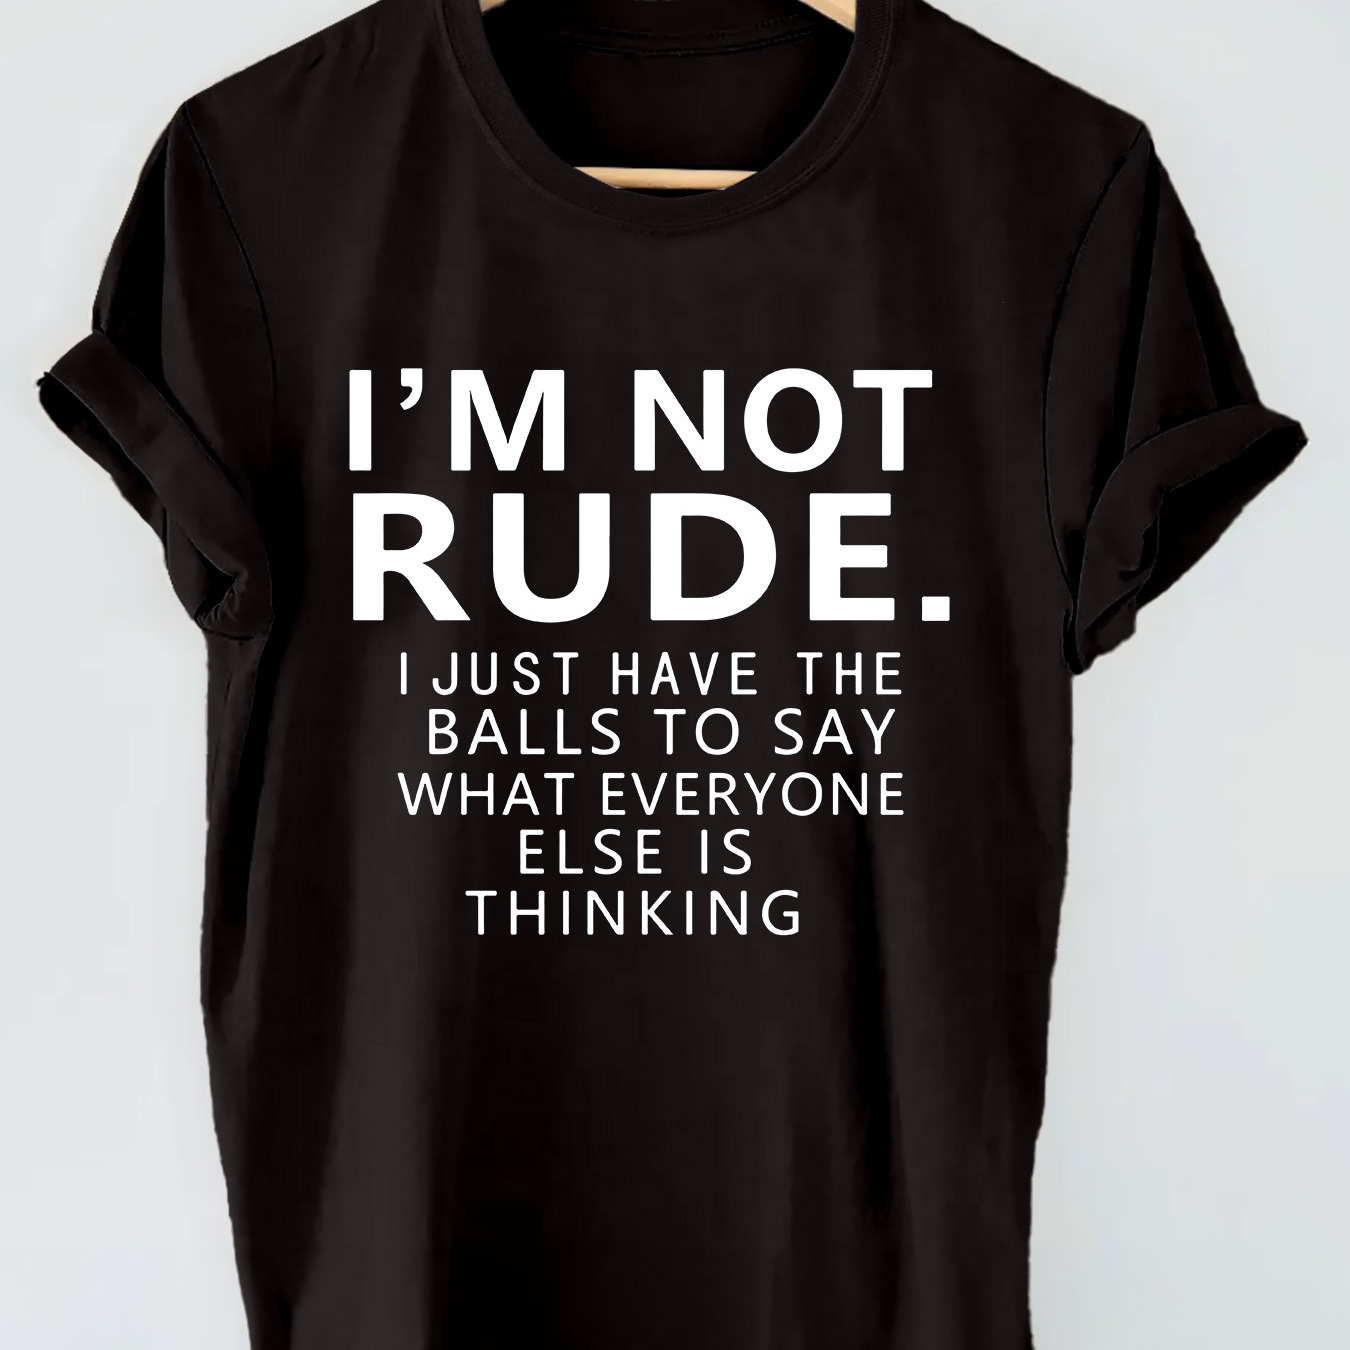 

I'm Not Rude Letter Print T-shirt, Short Sleeve Crew Neck Casual Top For Summer & Spring, Women's Clothing